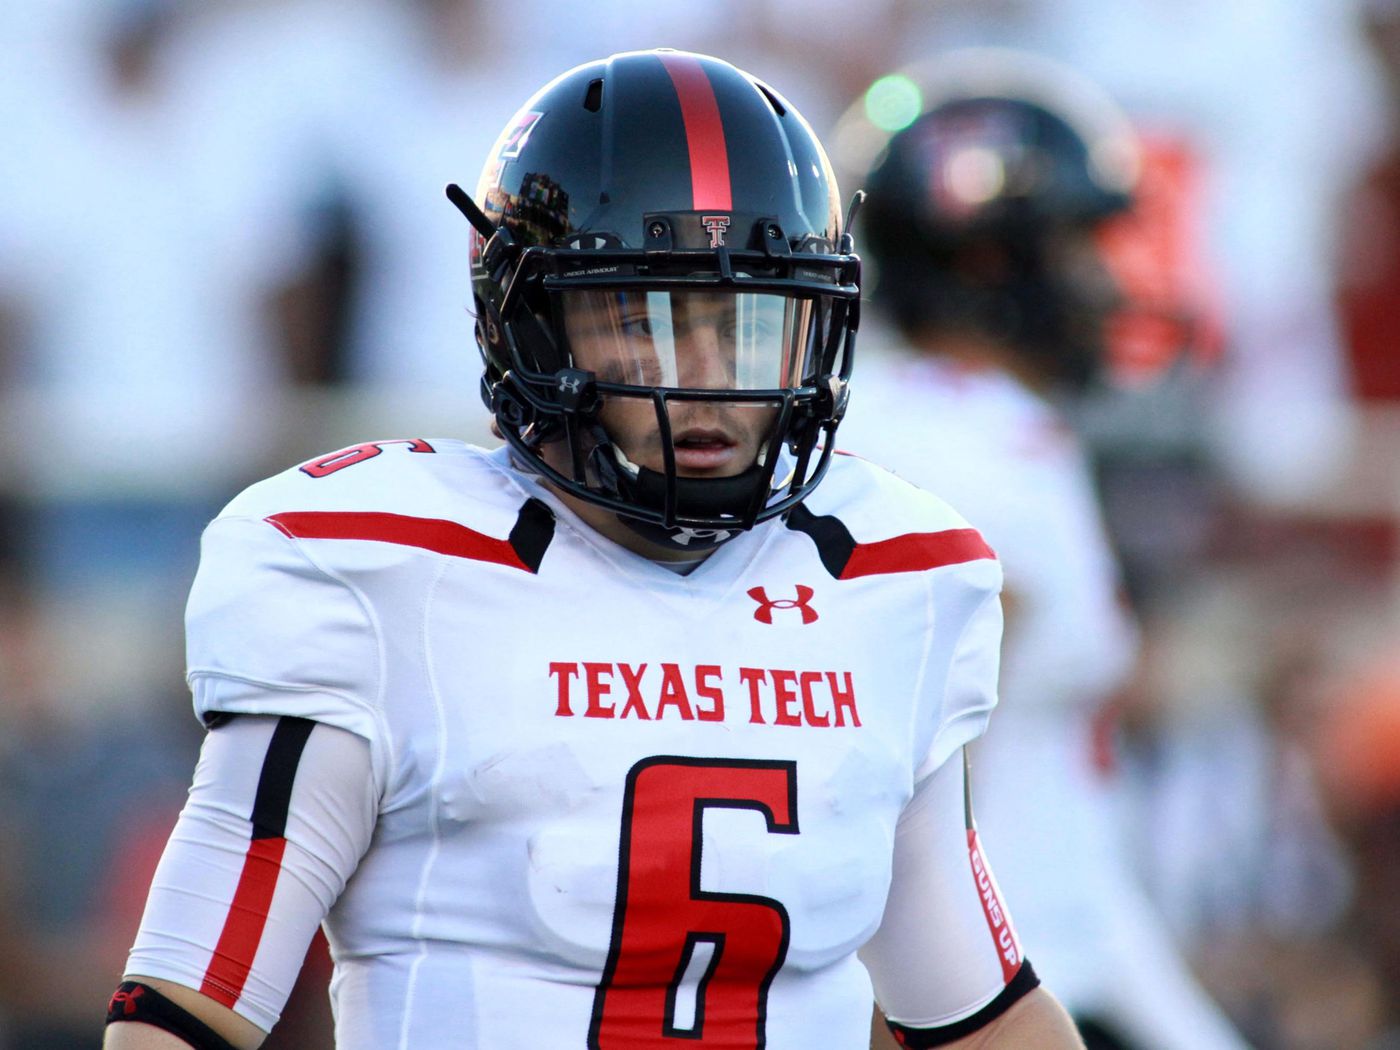 No Redshirt For 2014: A Baker Mayfield Situation - Crimson And Cream Machine